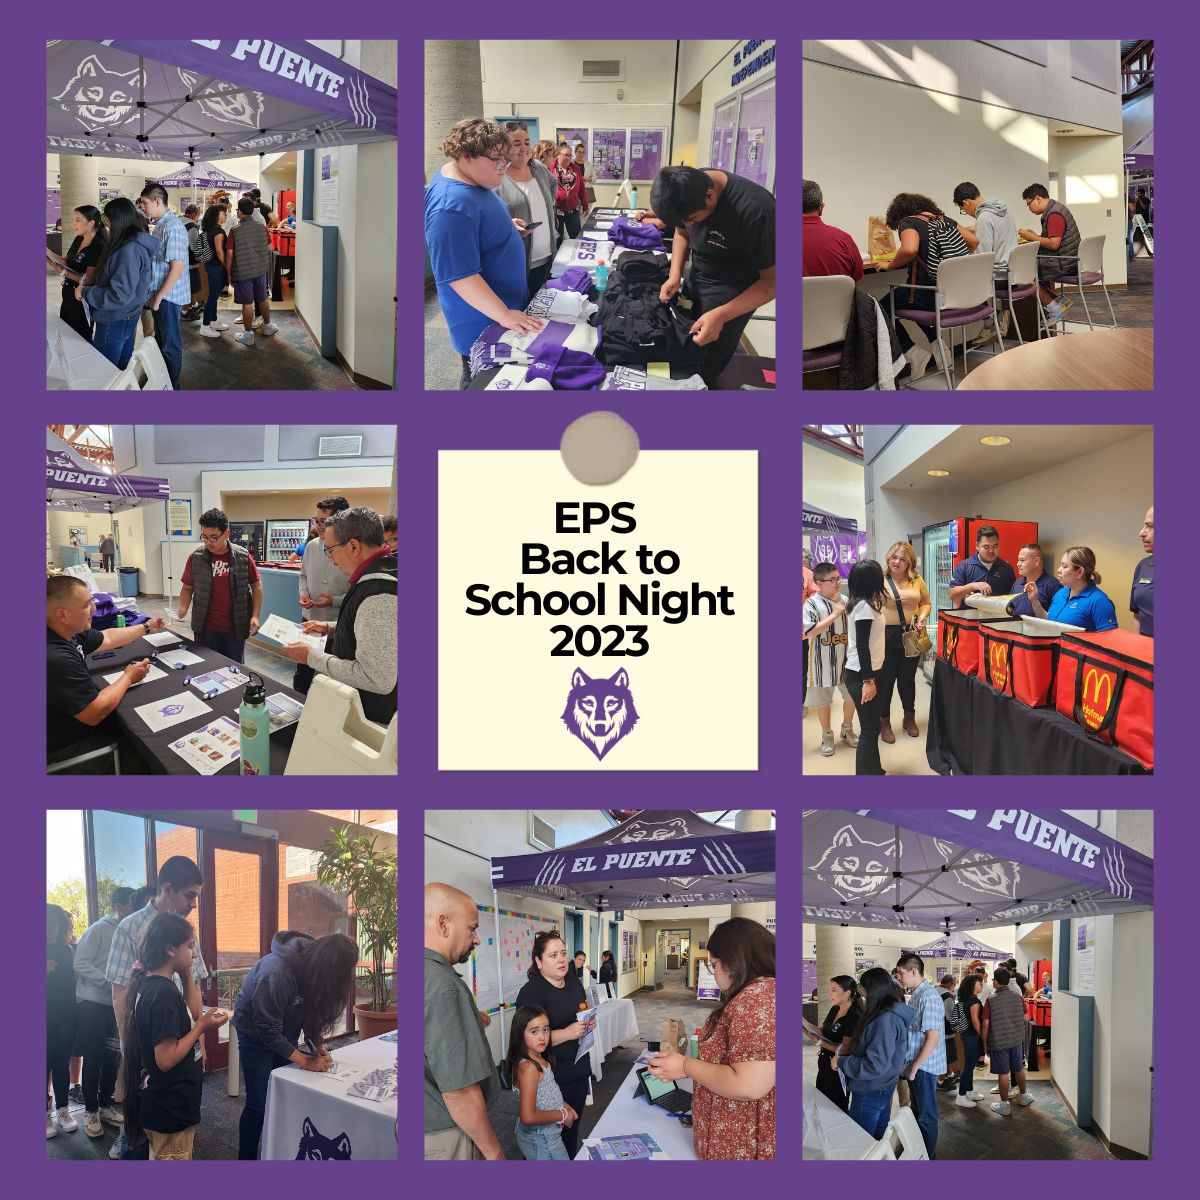 A special Thank You and appreciation all students, families and staff who attended our Back-to-School Night. Thank you, McDonald's for always supporting our EPS students and families. We value you all.